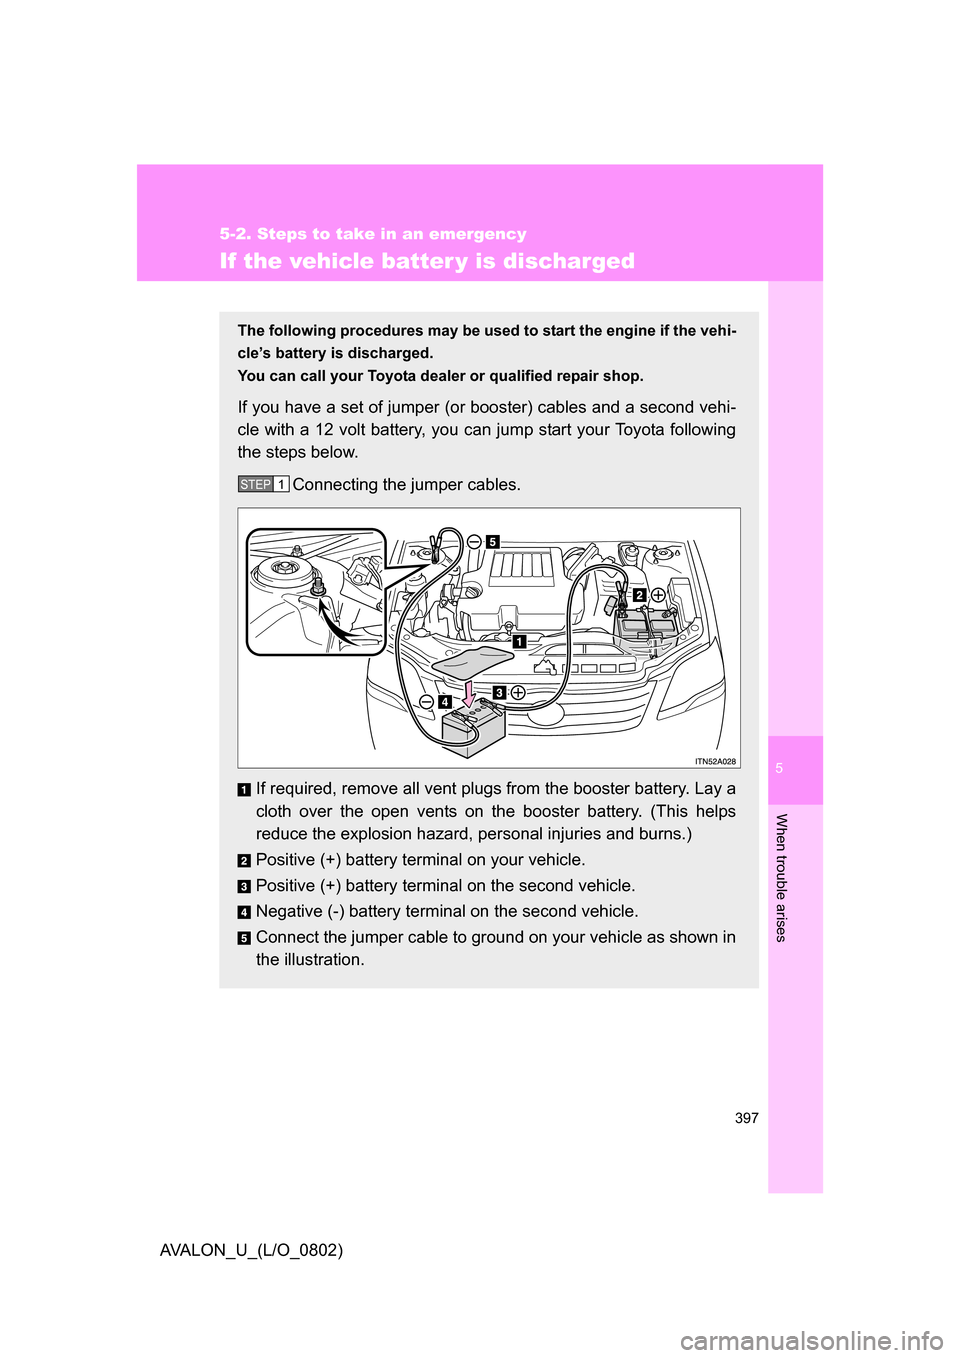 TOYOTA AVALON 2008 XX30 / 3.G Owners Manual 5
When trouble arises
397
5-2. Steps to take in an emergency
AVALON_U_(L/O_0802)
If the vehicle batter y is discharged
The following procedures may be used to start the engine if the vehi-
cle’s bat